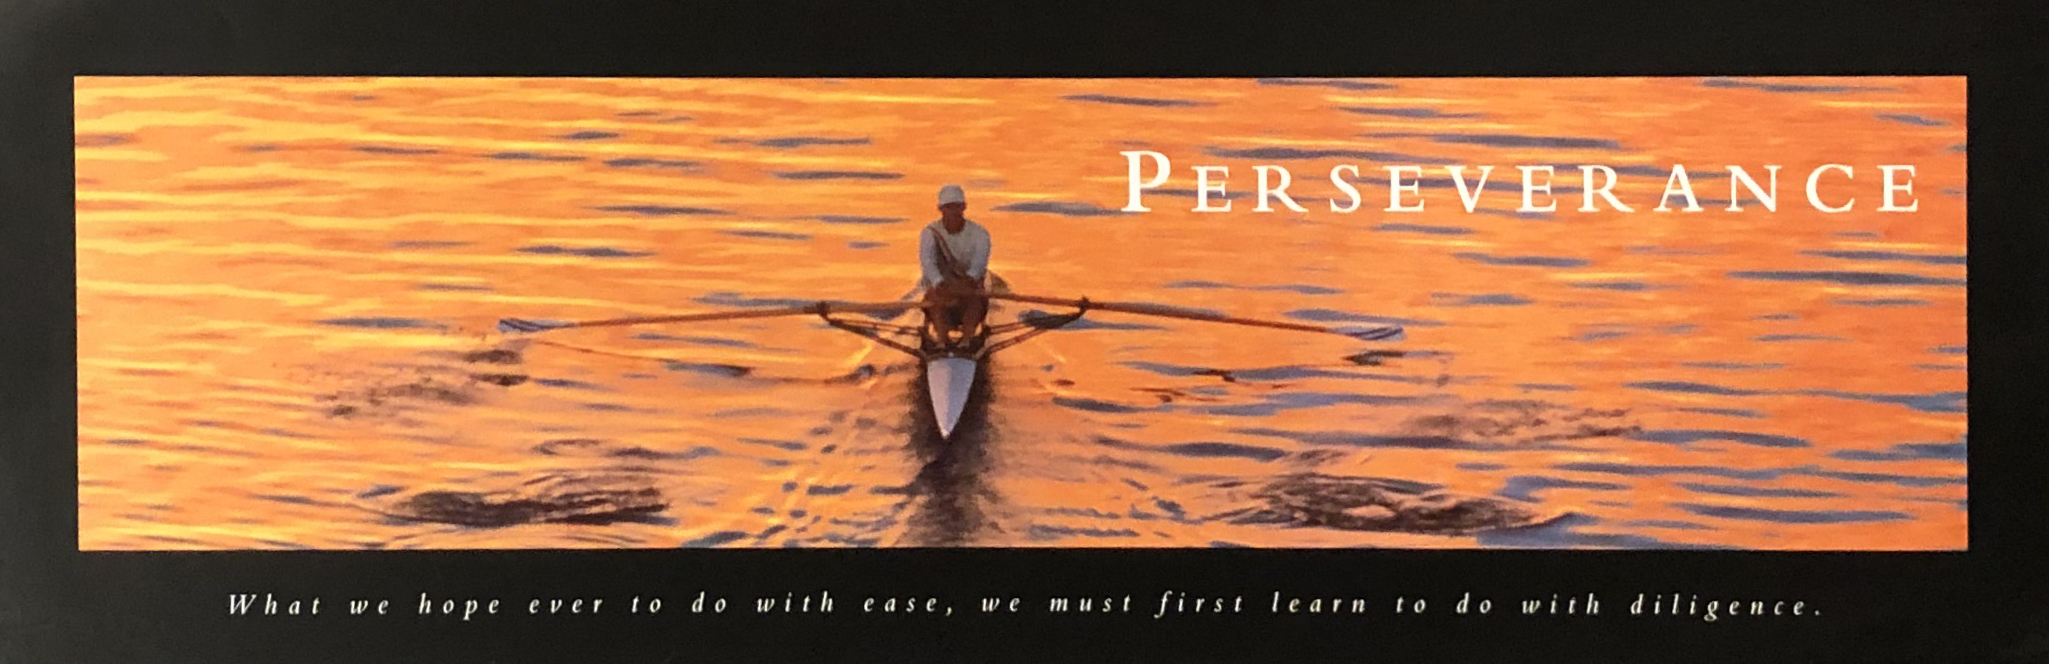 Perseverence - Sculler